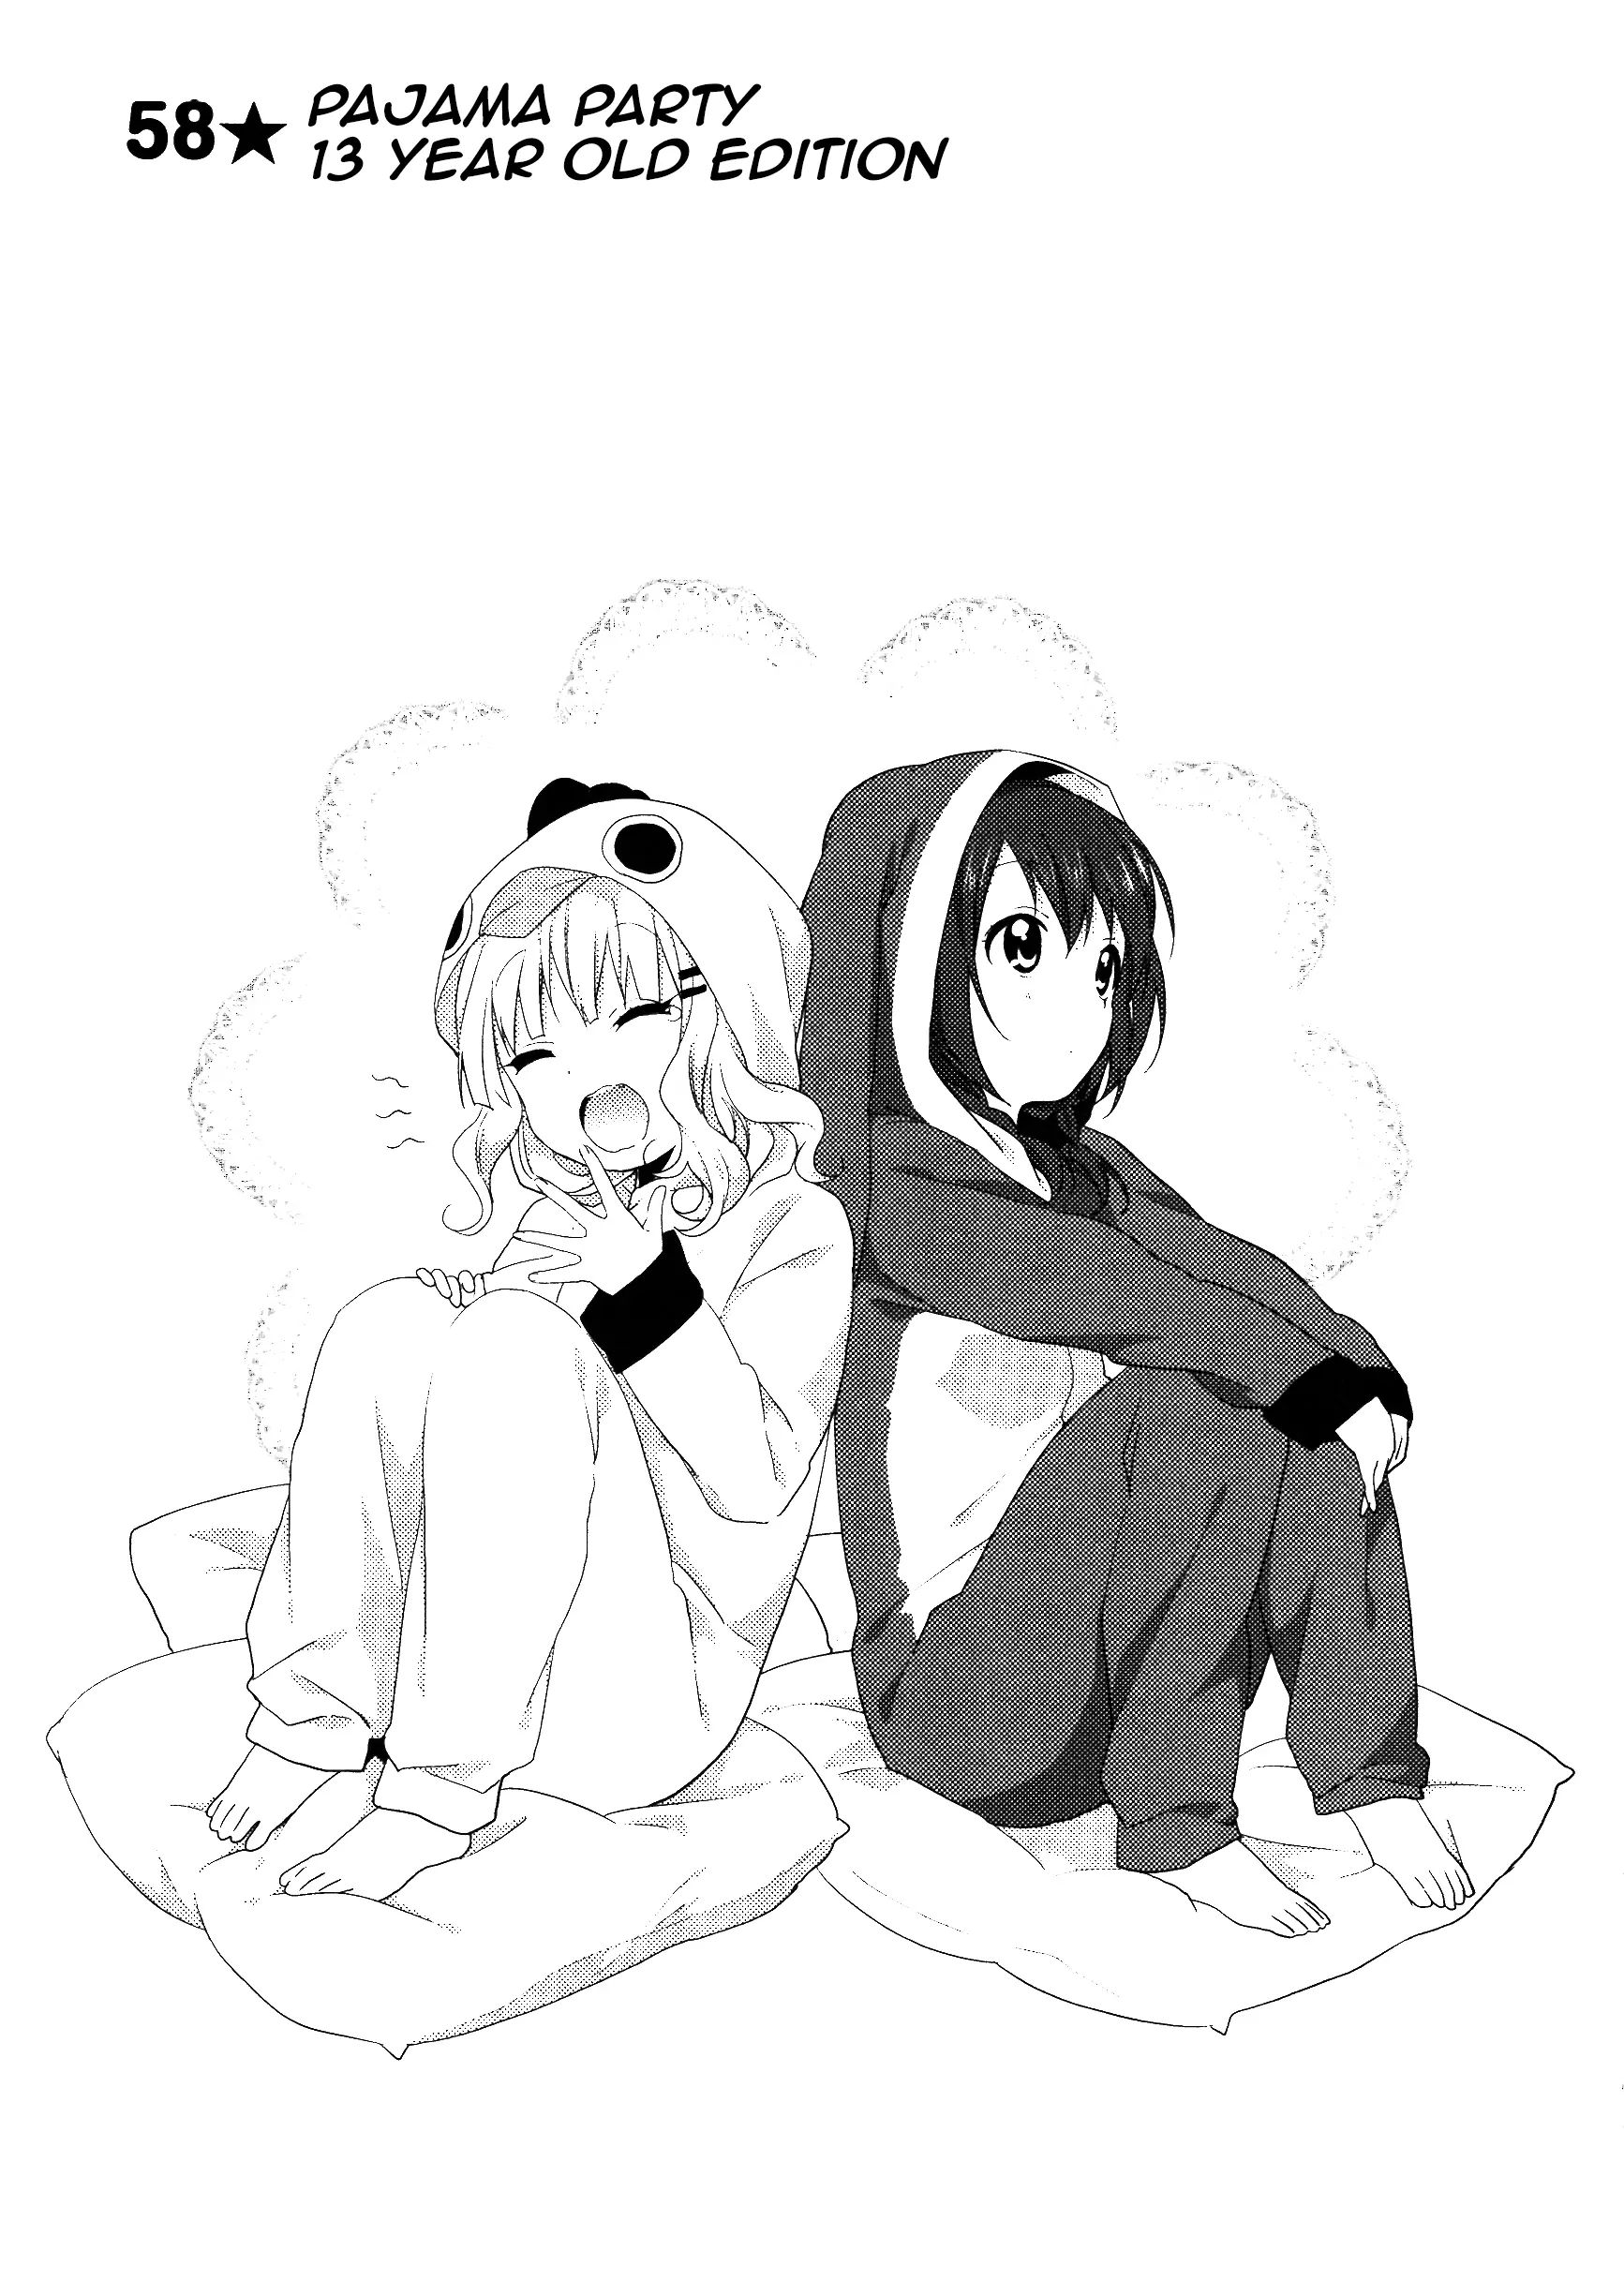 Yuru Yuri Vol.8 Chapter 58: Pajama Party 13 Year Old Edition - Picture 1